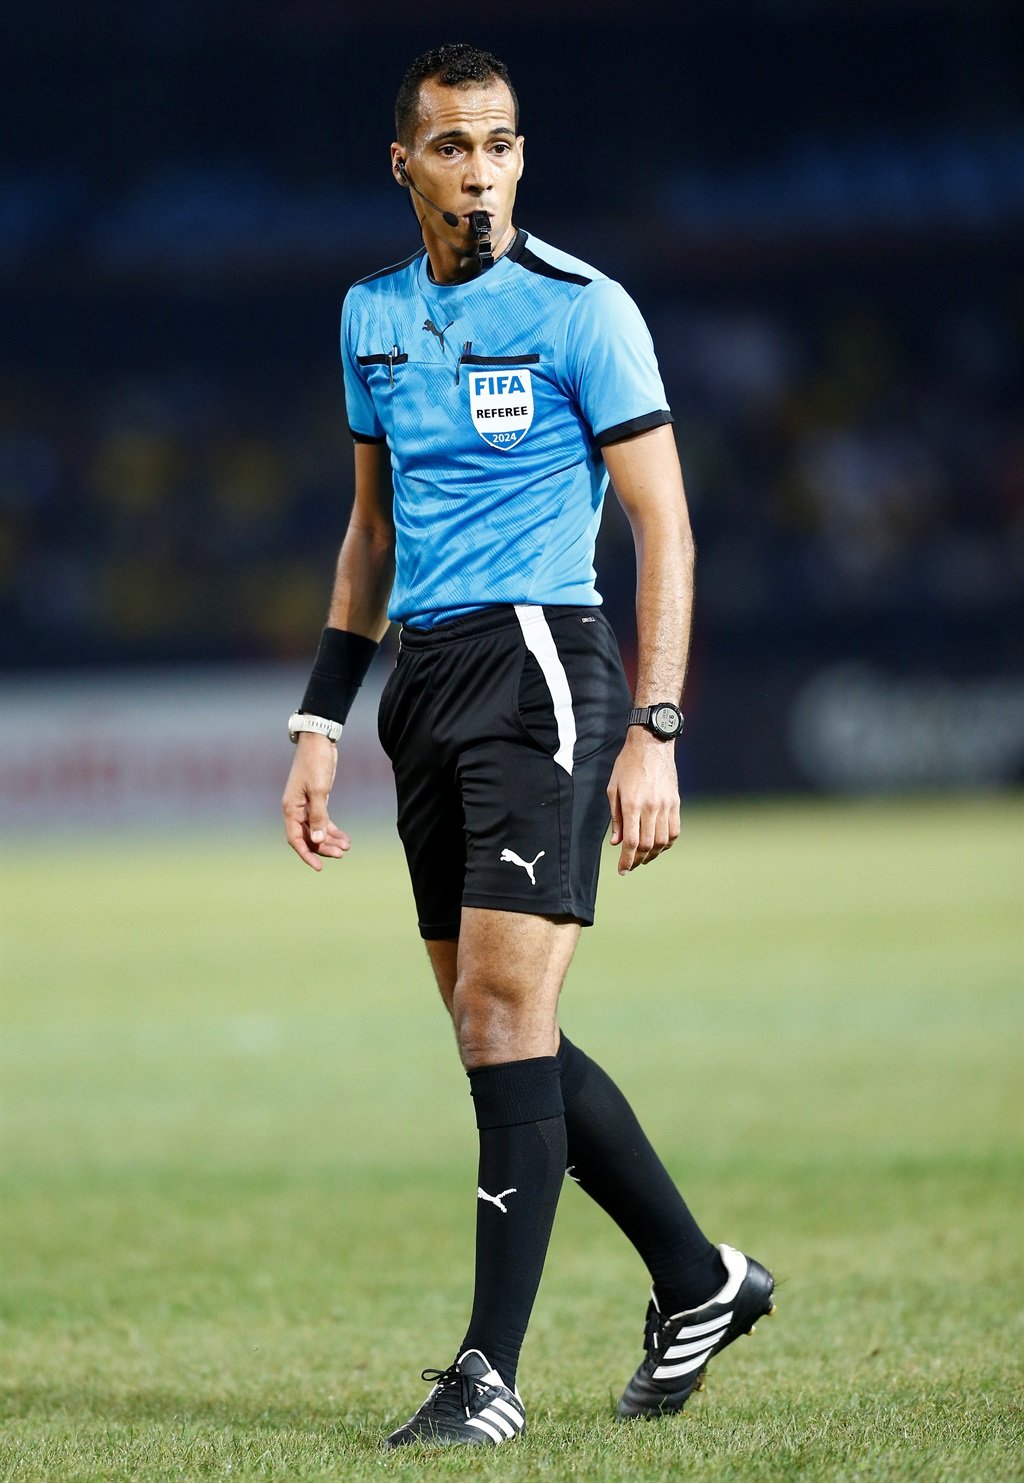 FIFA has taken a major decision regarding the referee who was in charge of the second leg of Mamelodi Sundowns and Young Africans' CAF Champions League quarter-final.